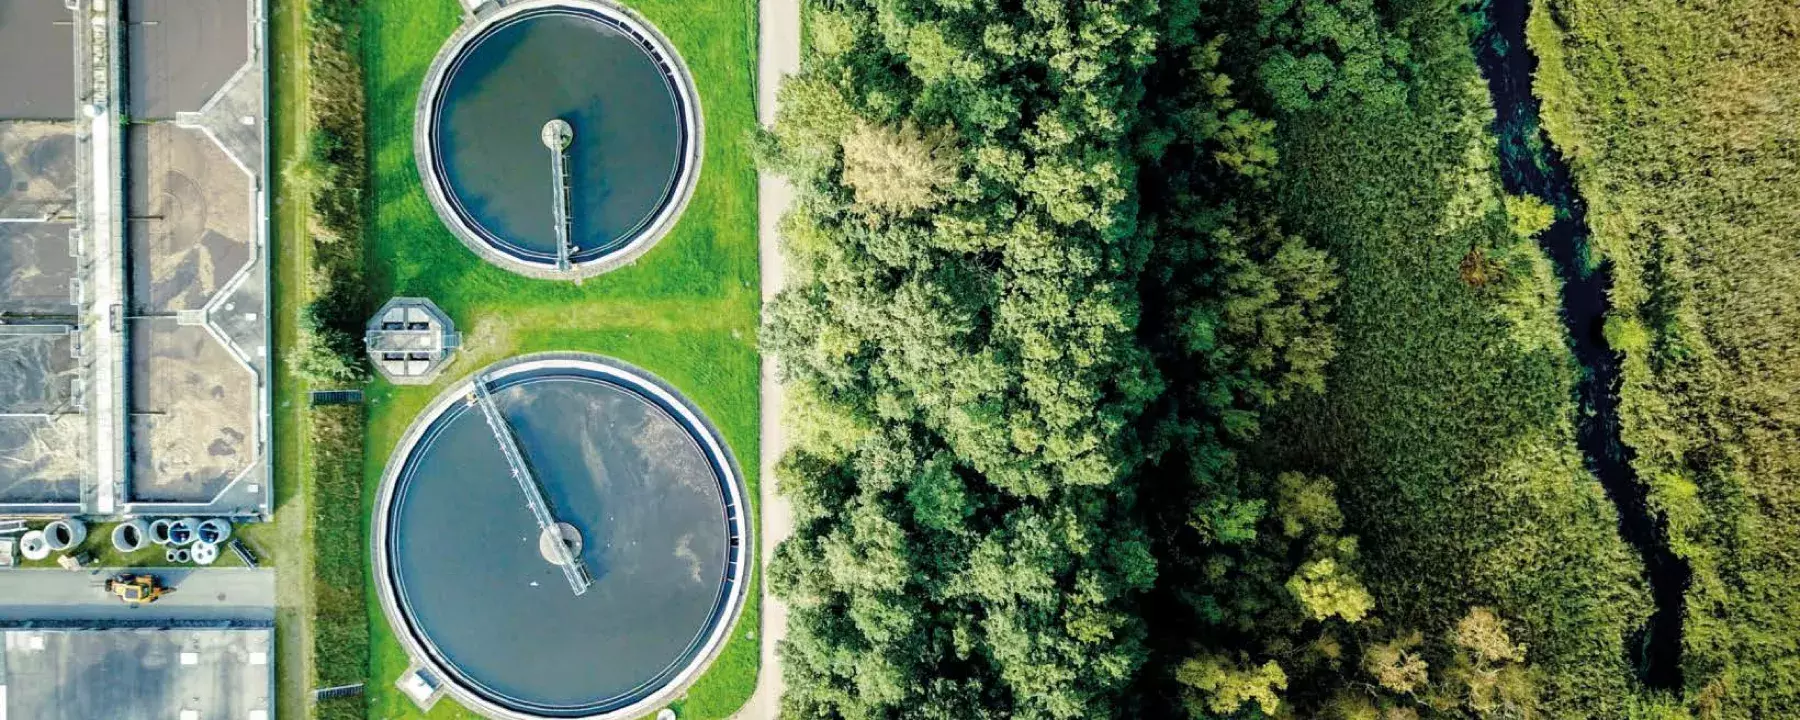 Enabling water companies to transform for a better future